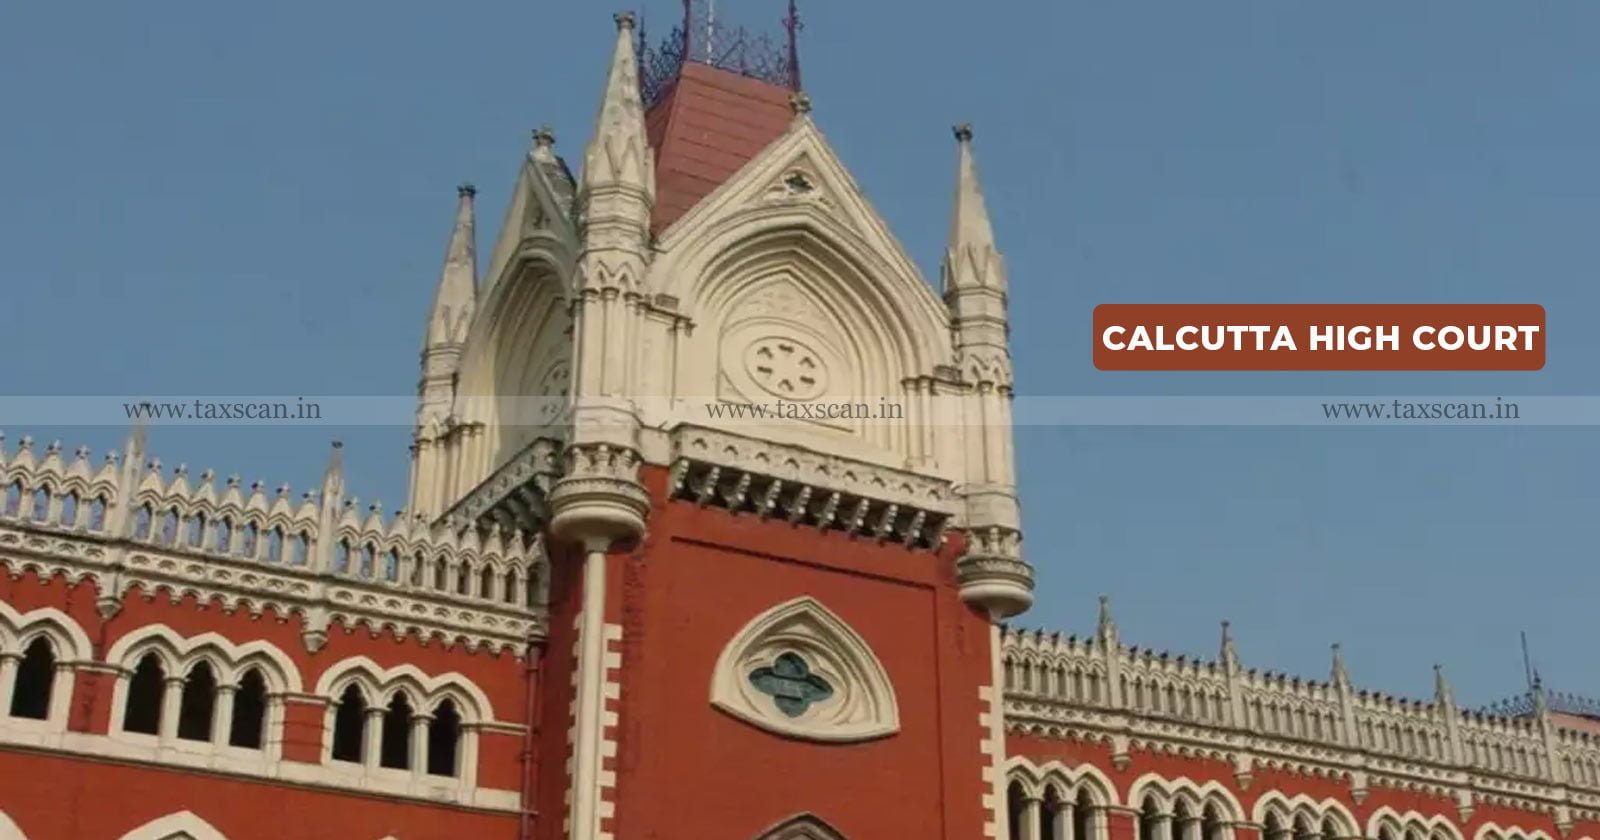 Agent - Collection of CST - CST - Refund - Refund of Excess Tax - Excess Tax - Tax - Calcutta HC - taxscan